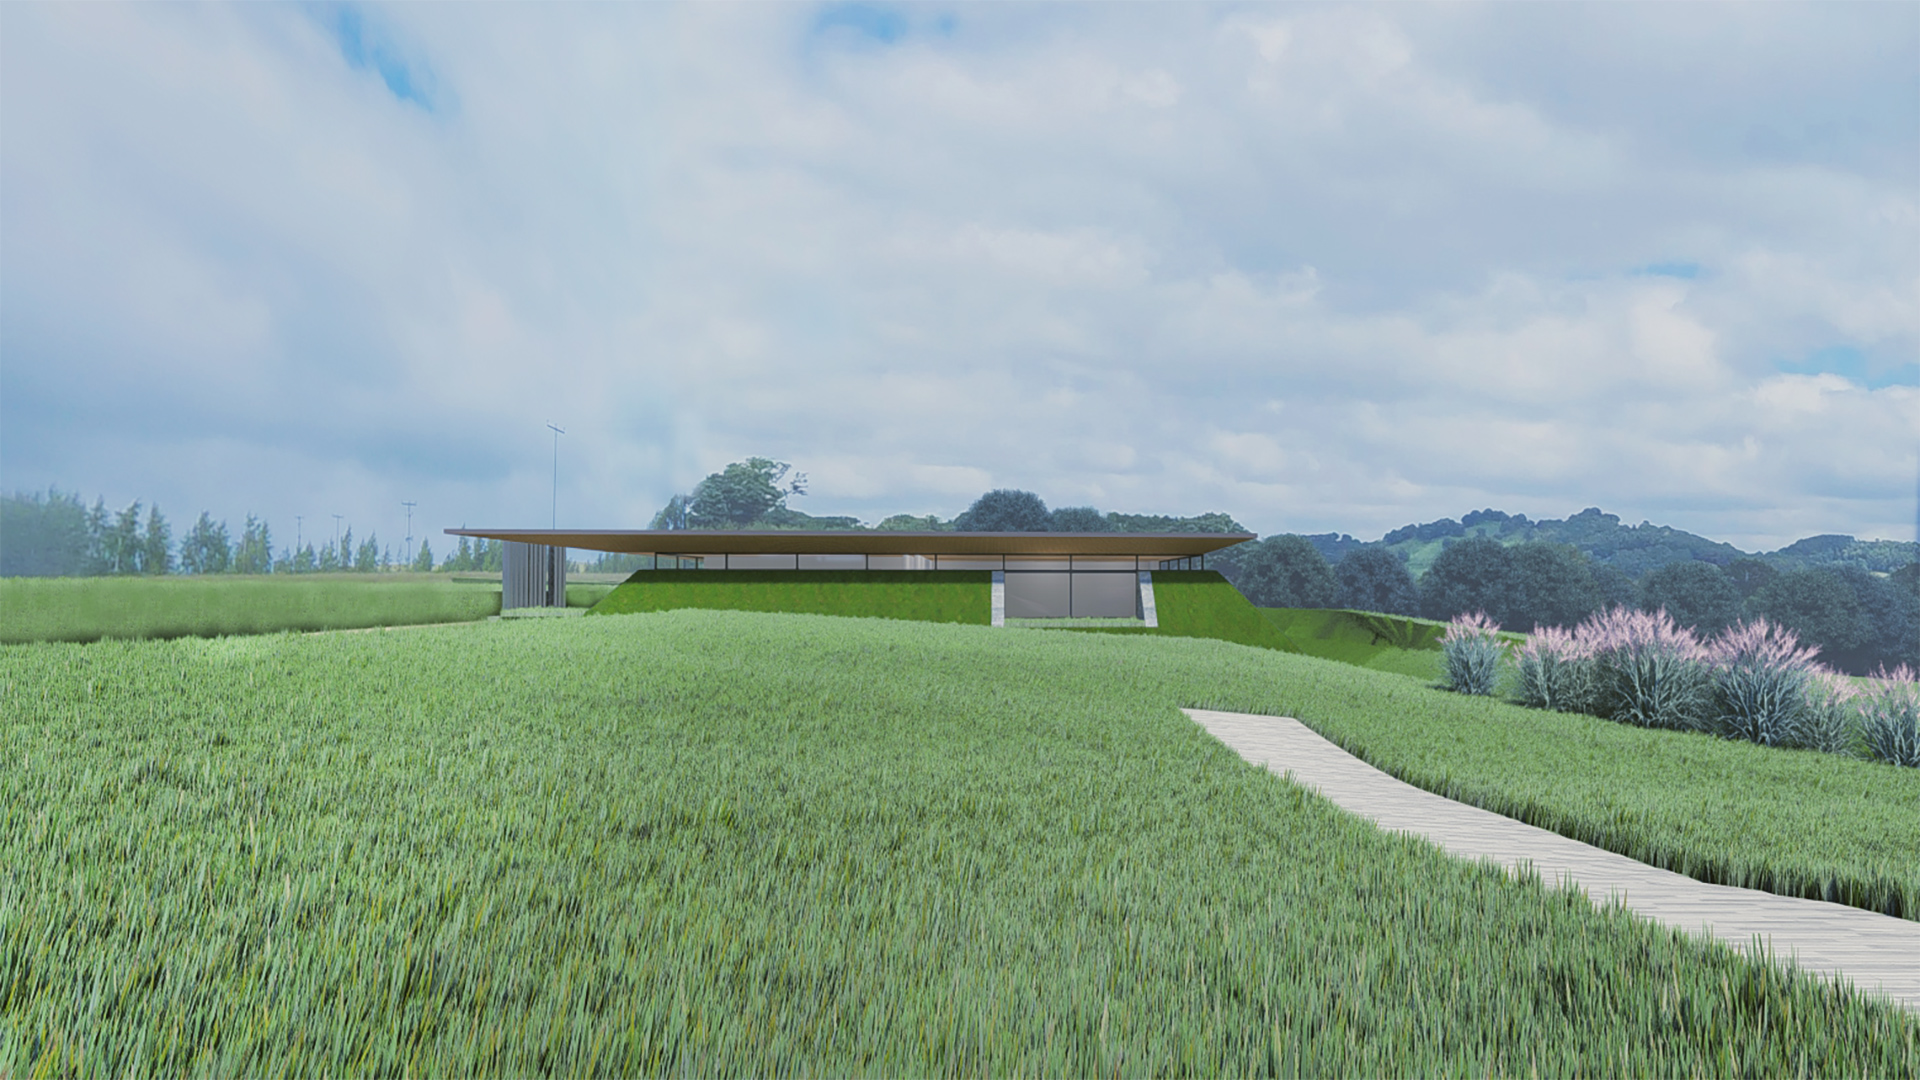 concept for a new contemporary crematorium in Wales west elevation